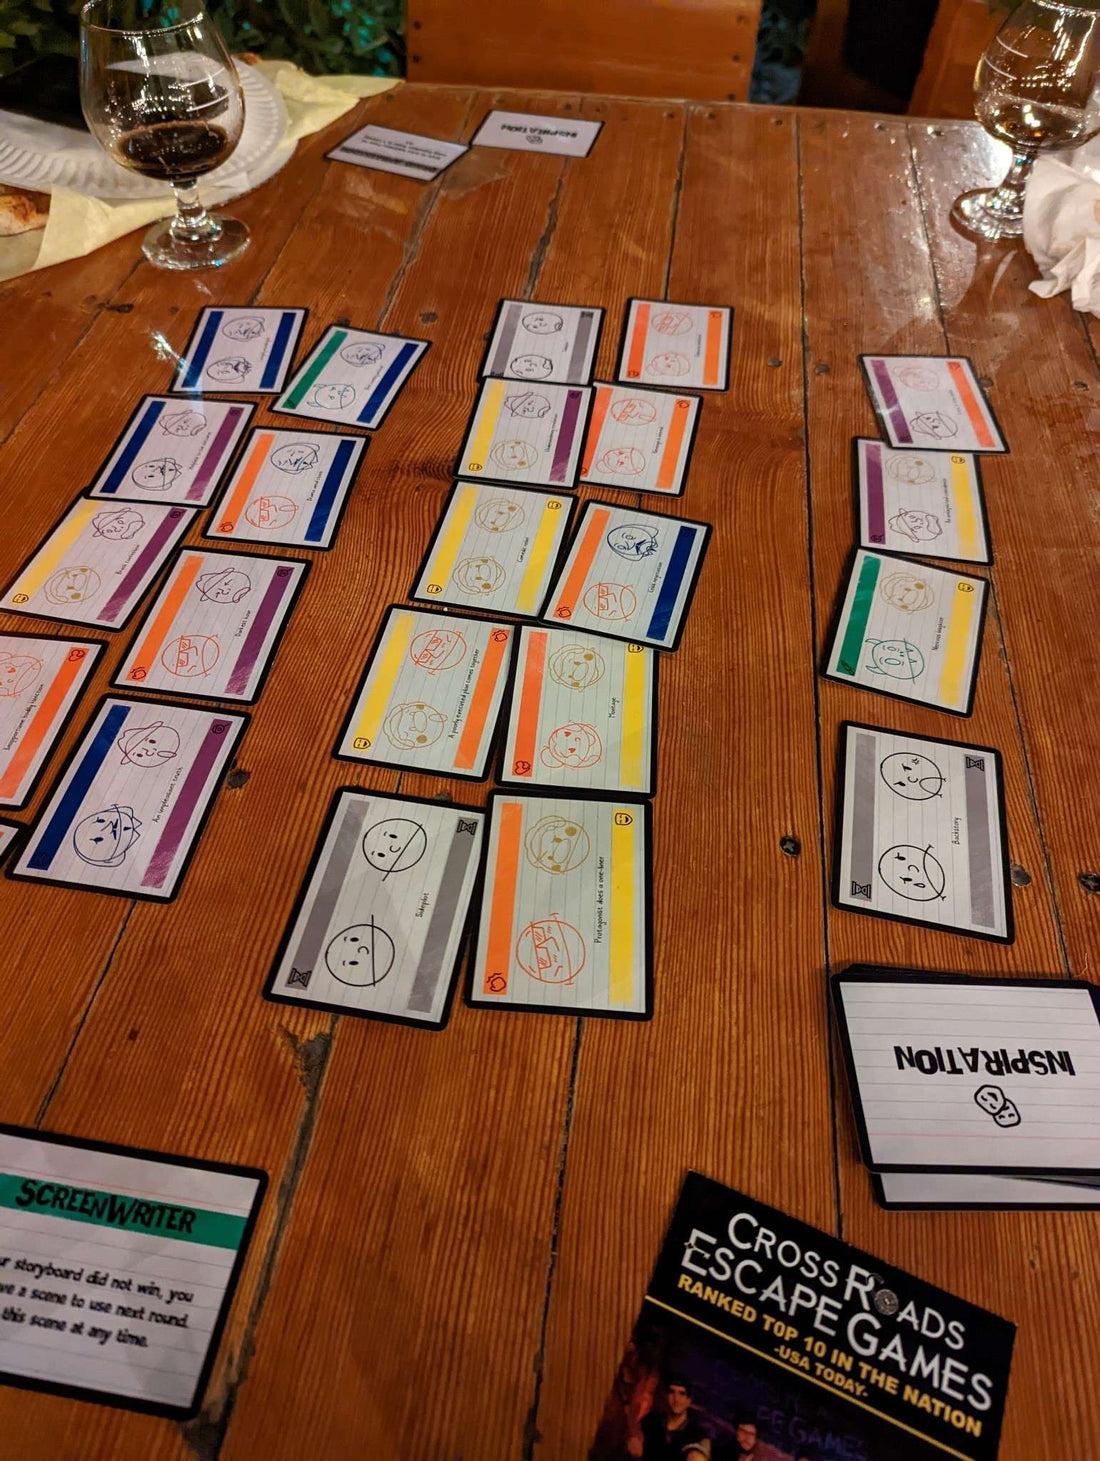 Our first playtest!